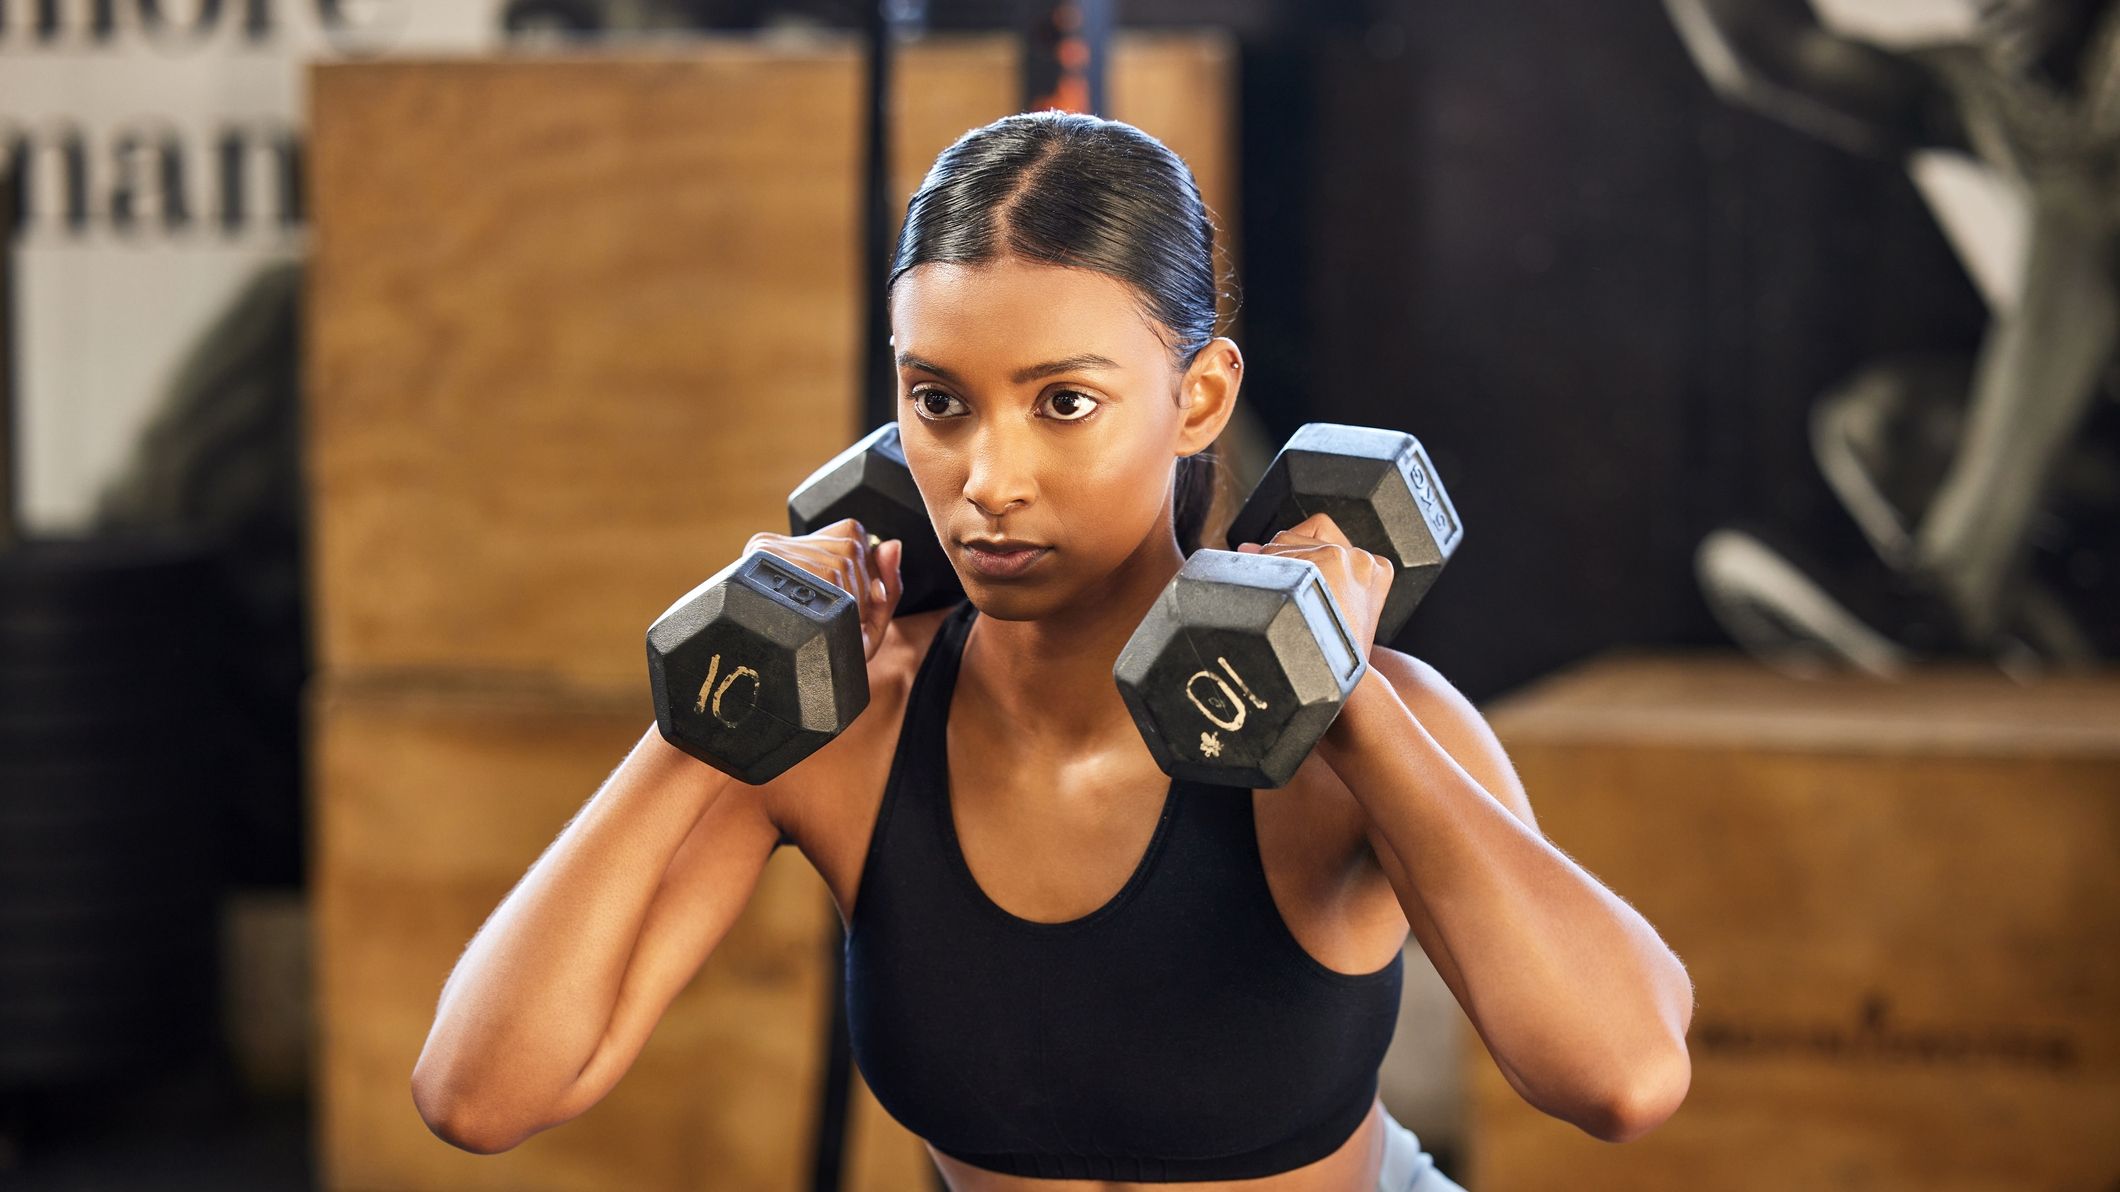 7 Ways Fitness Professionals Can Help Their Clients Improve Their Body  Image - Girls Gone Strong